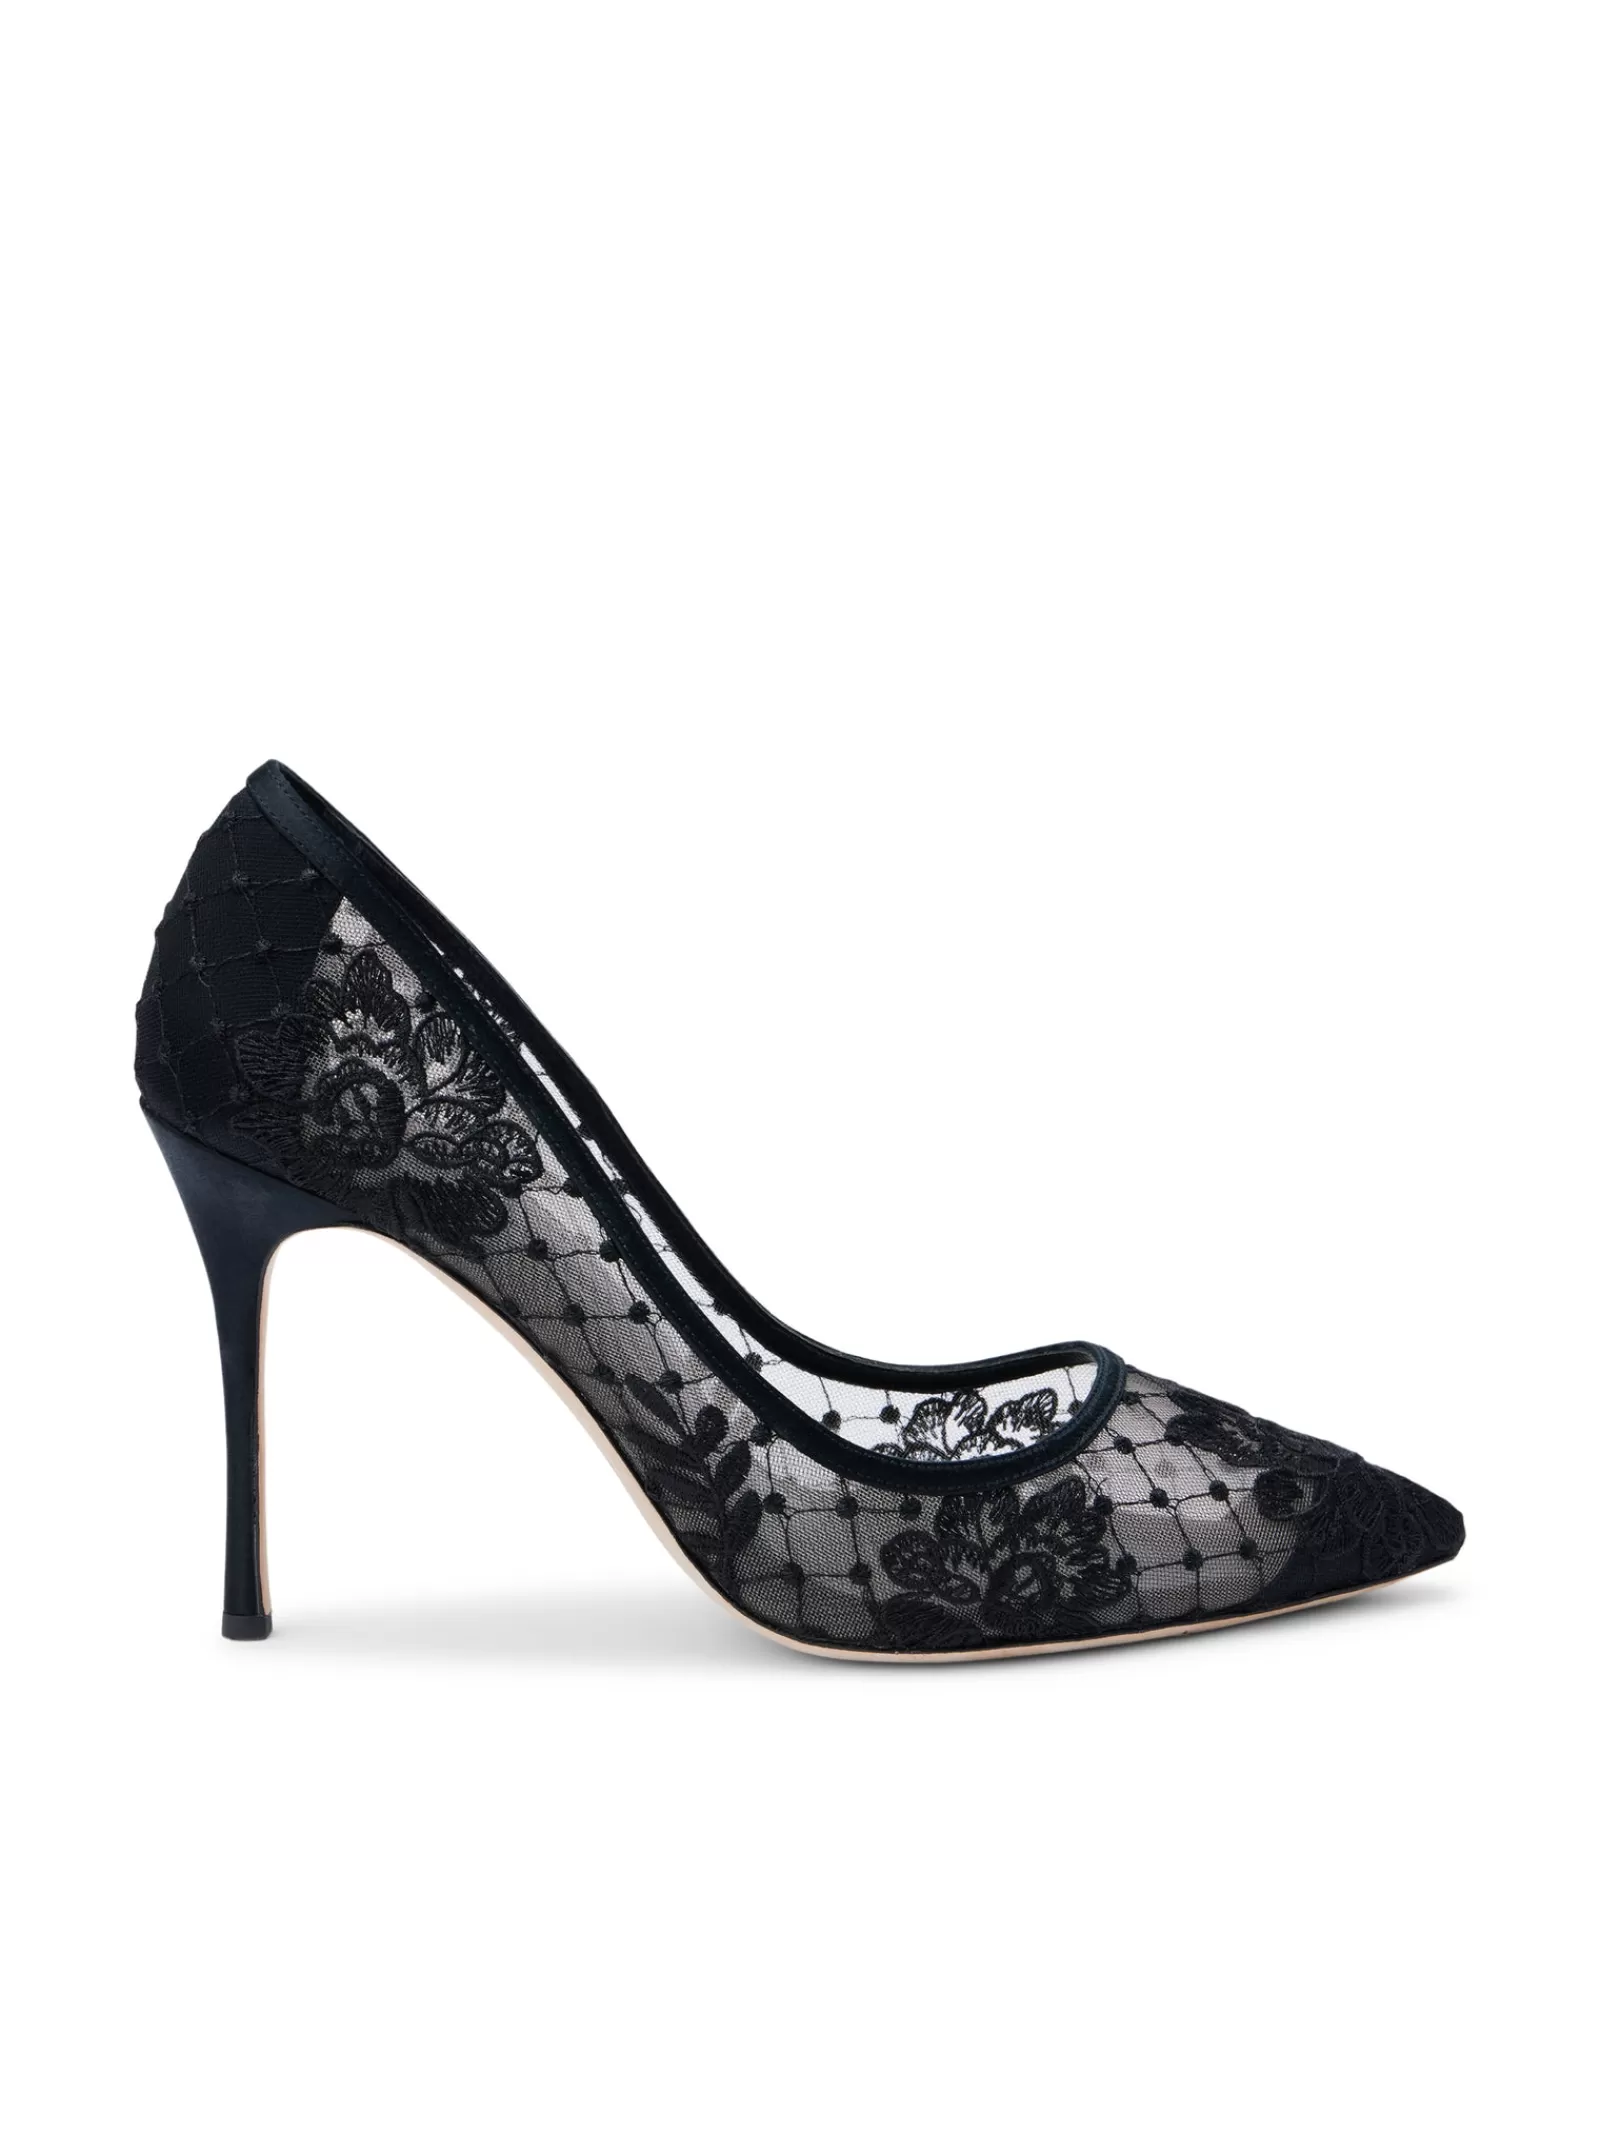 L'AGENCE Anais Lace Pump< Resort Collection | All Things Black